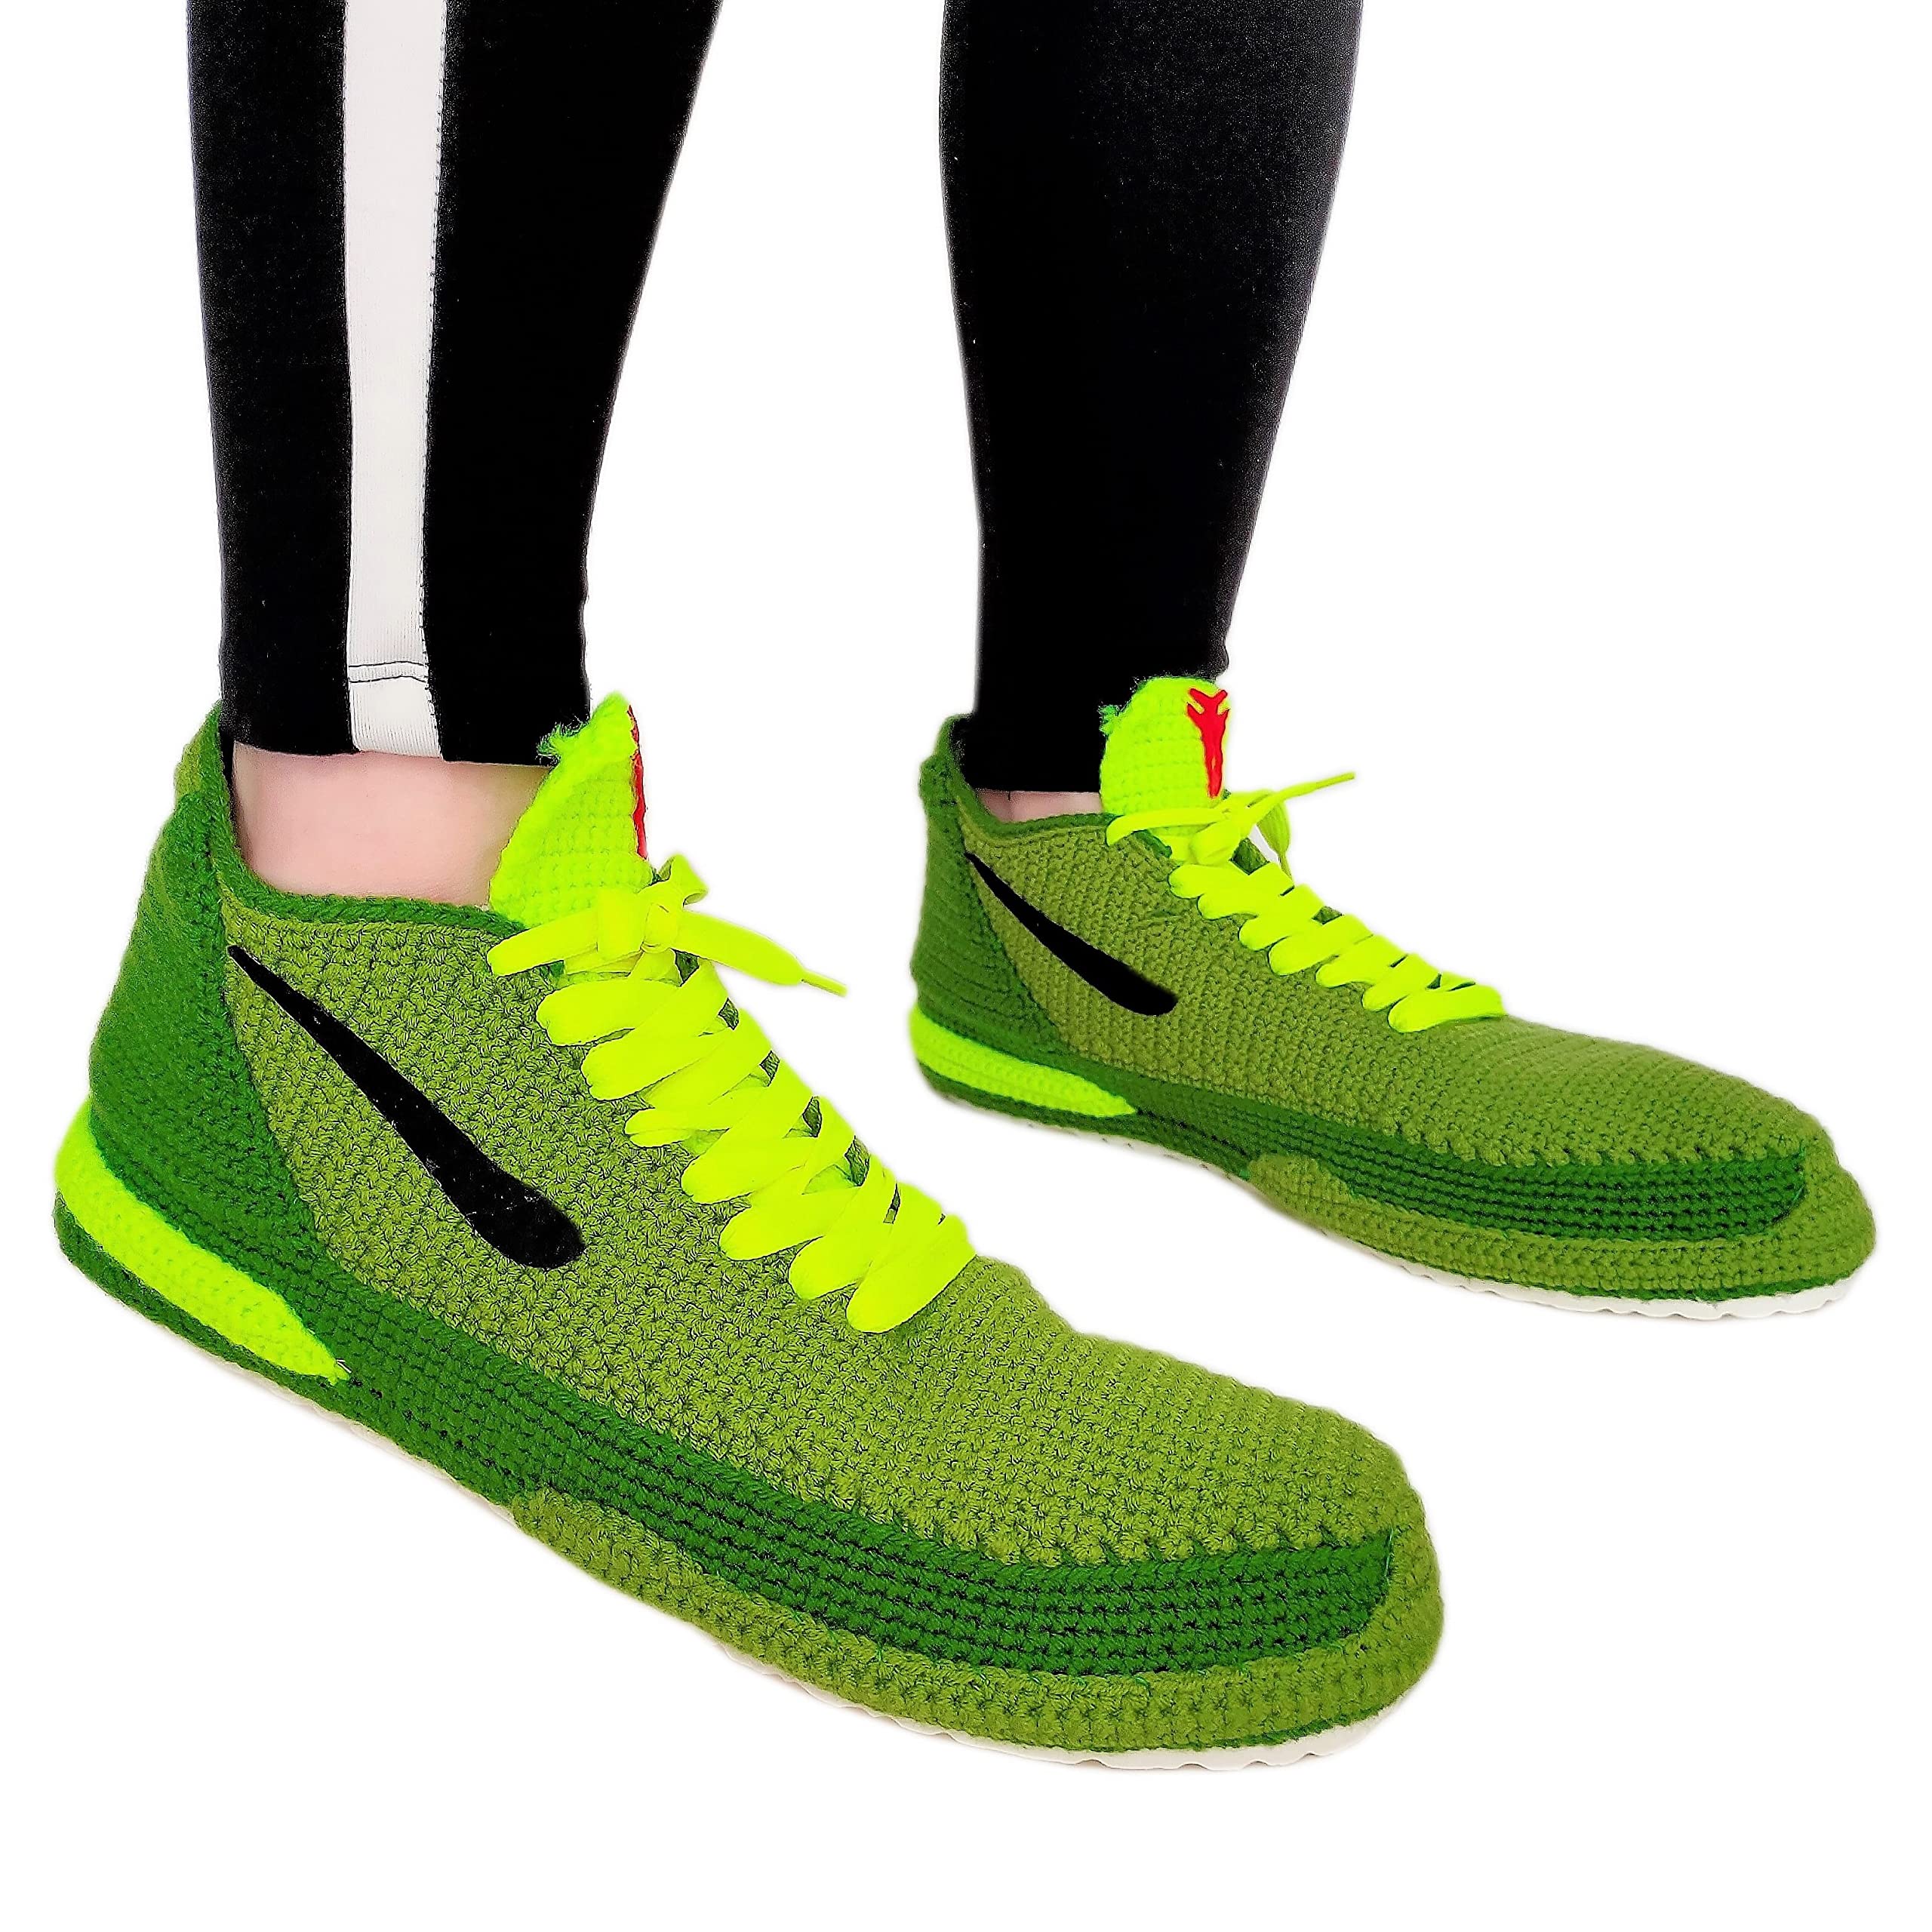 Ko_be Mamba 8 24 Bryant Green Christmas Slippers, Retro Basketball Protro Shoes 2020, Knitted The Grinchs Sneakers, Handmade Custom Home Shoes Slippers (US SIZE - 5 (MEN))